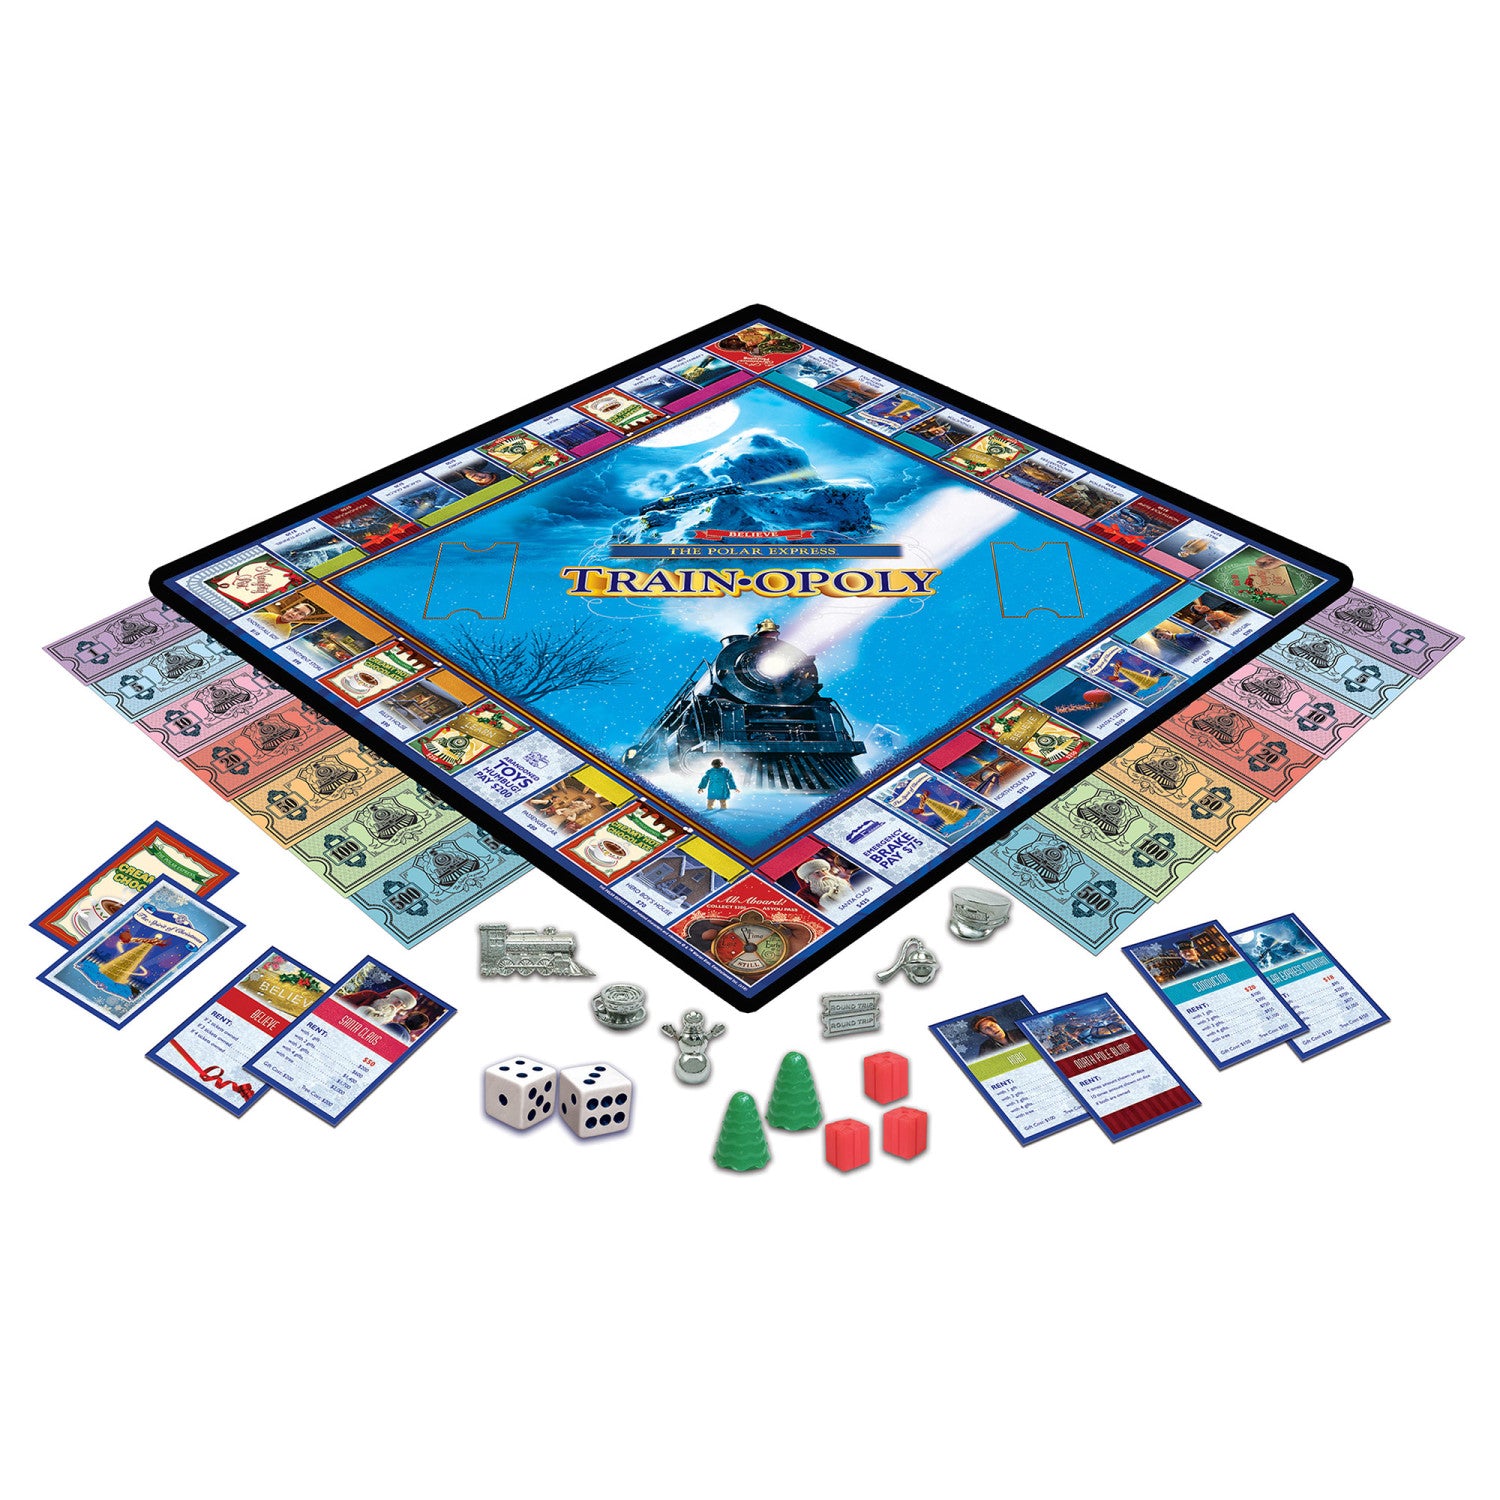 The Polar Express Opoly Board Game [TY-22-339] - $29.99